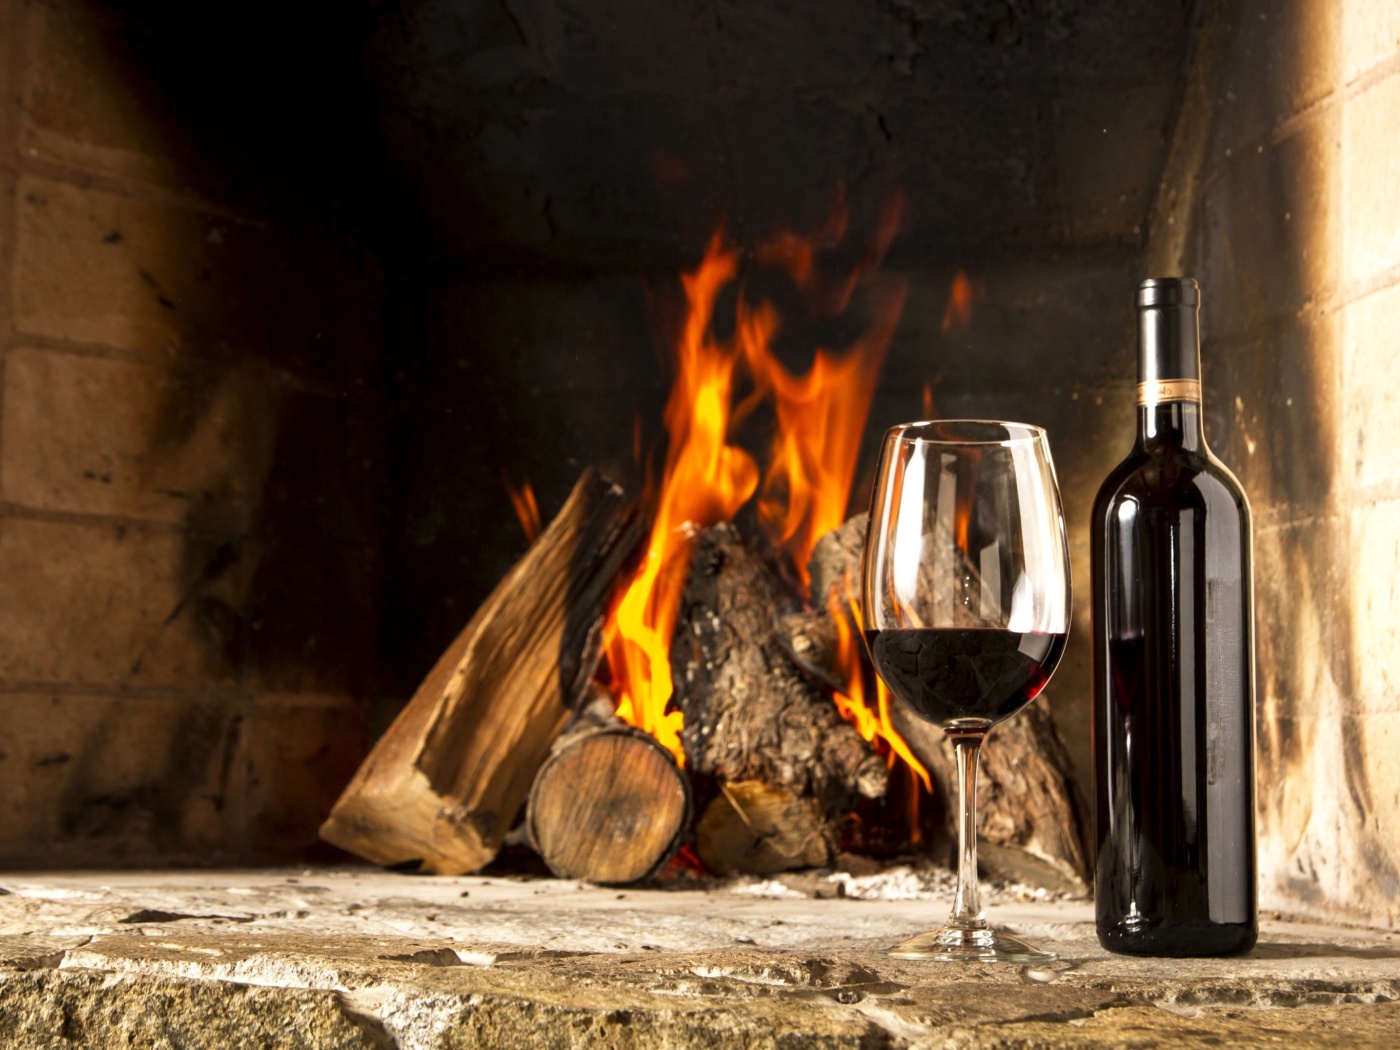 Das Wine and fireplace Wallpaper 1400x1050